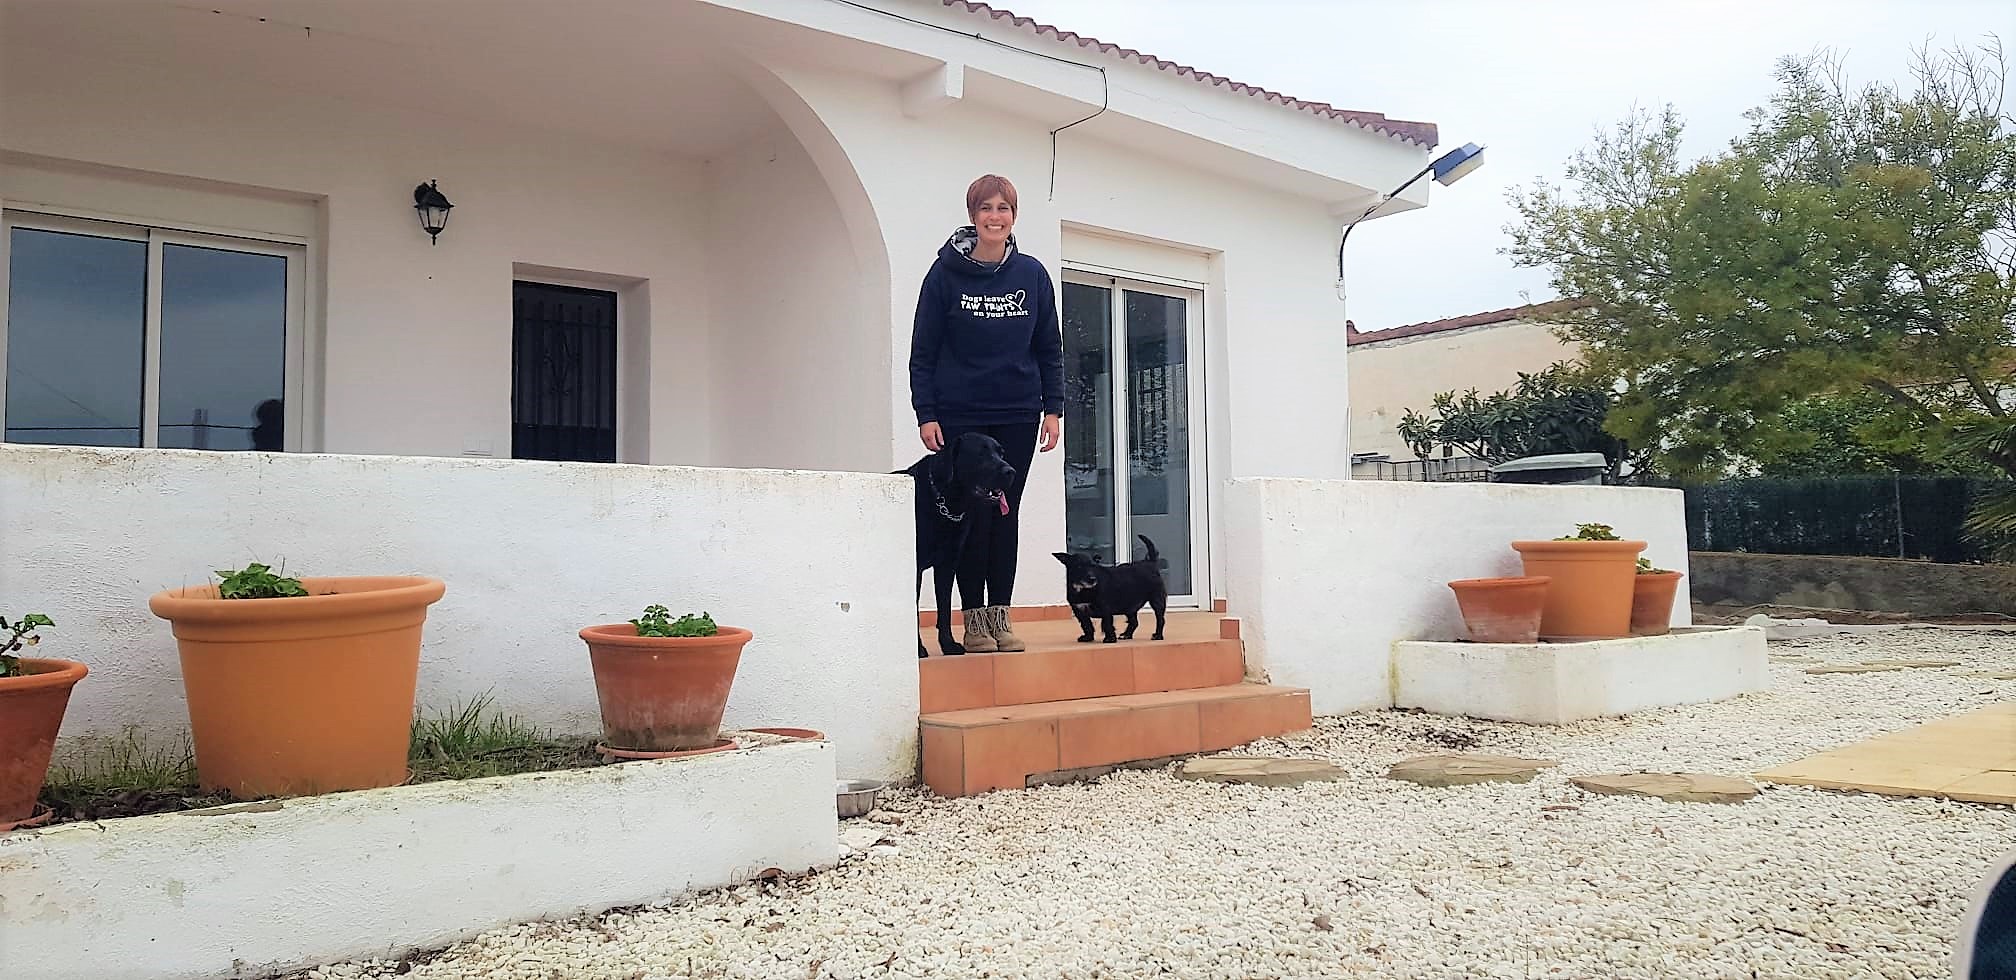 My Fur-ever Home in Rural Valencia!